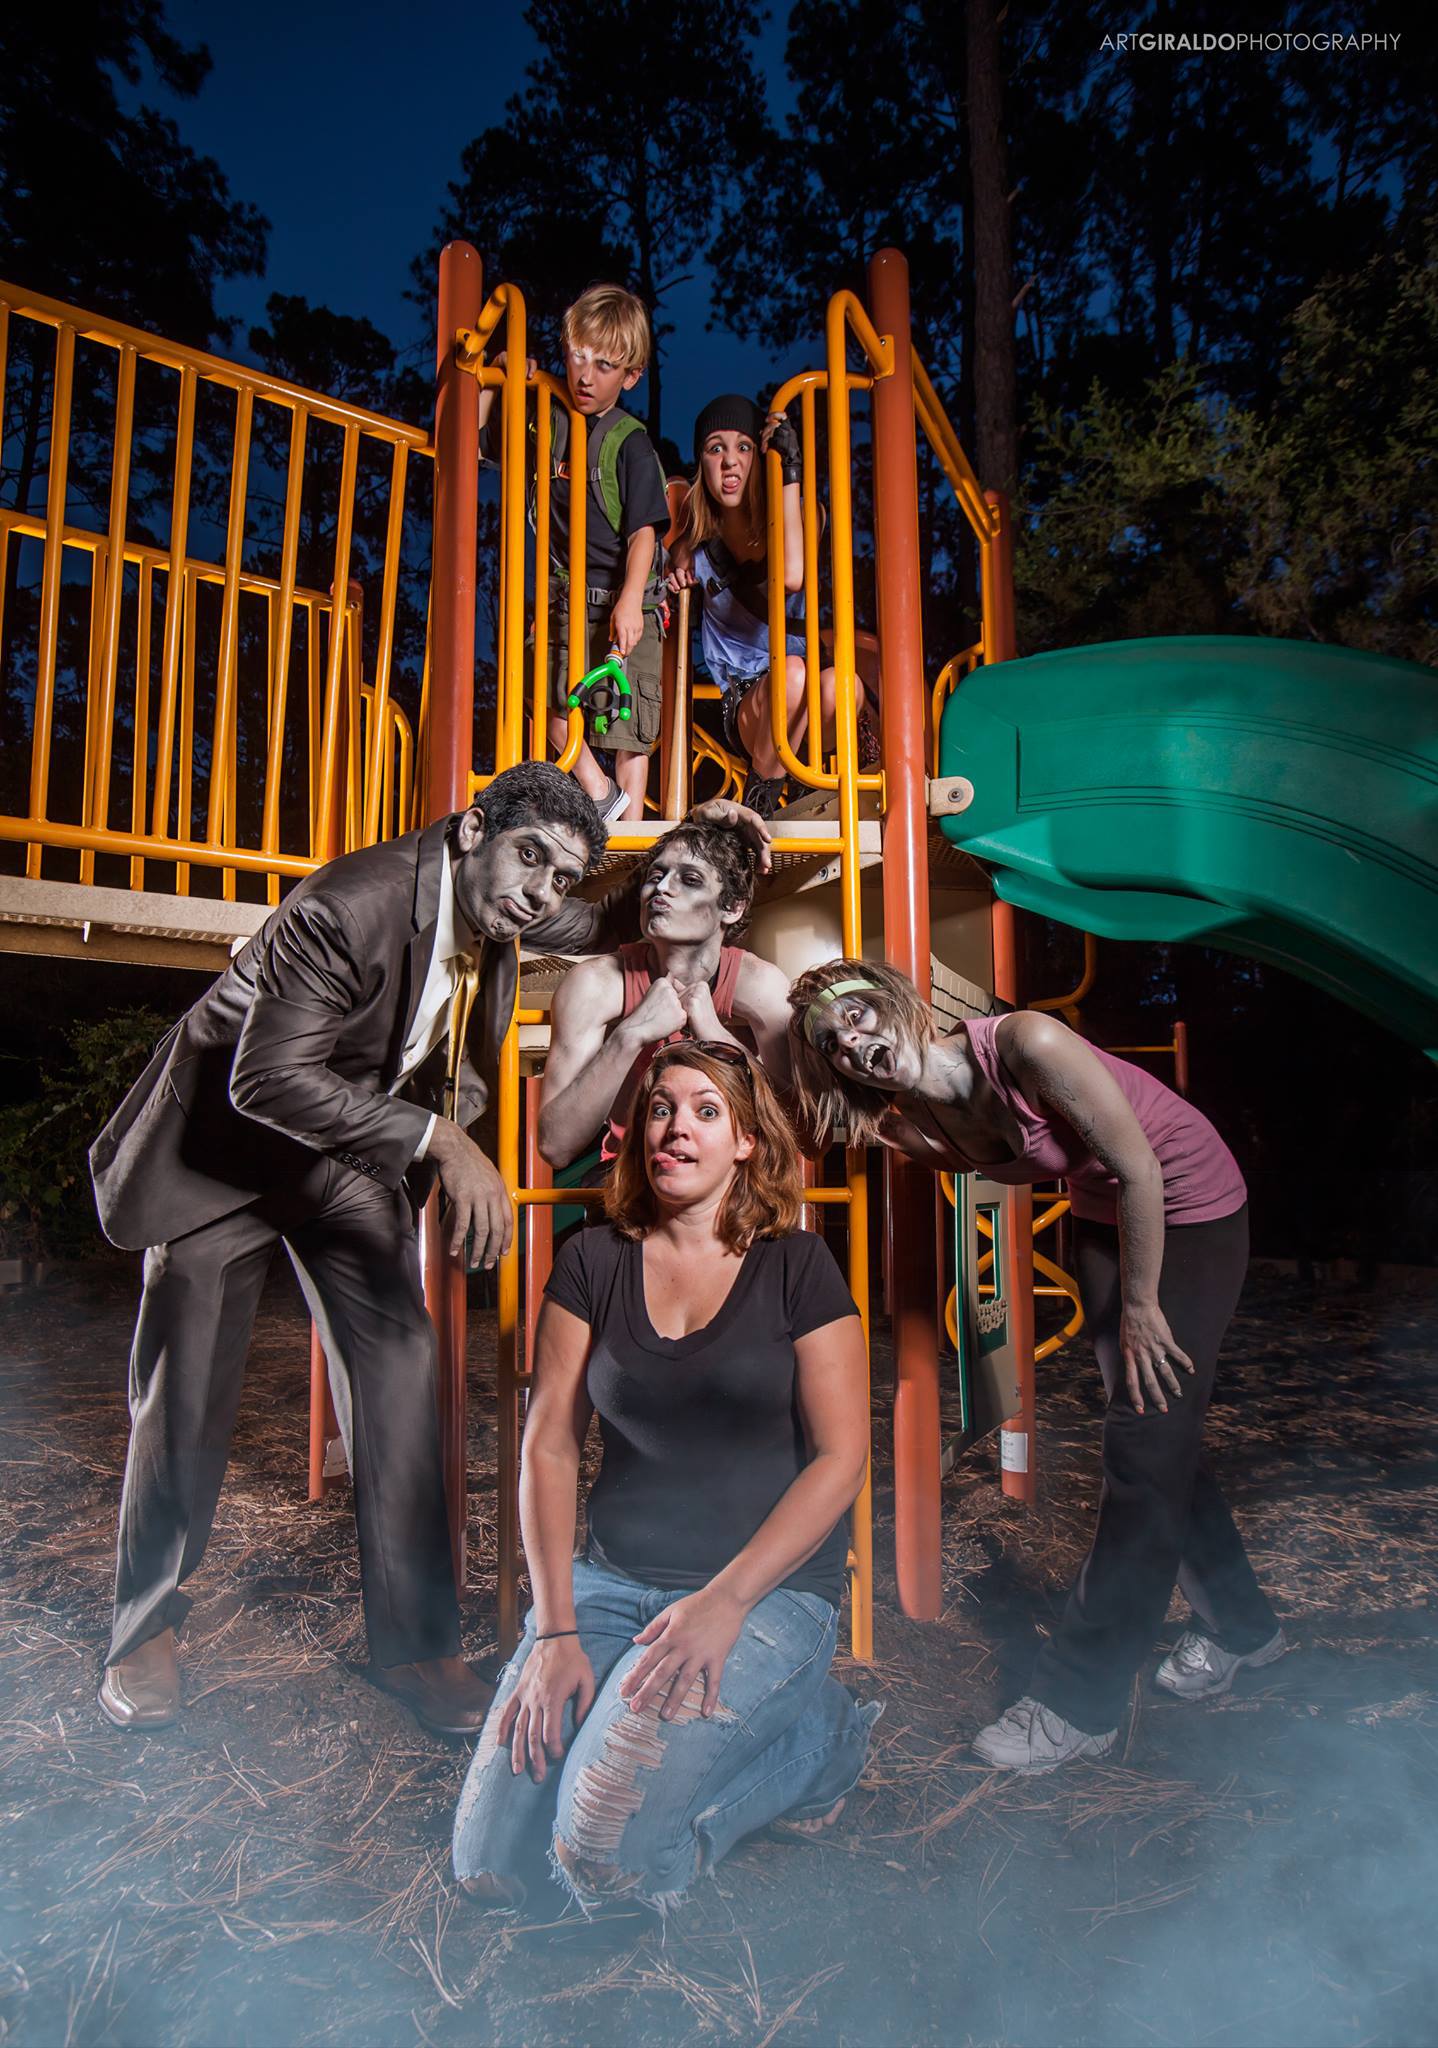 Writer/Producer Courtney Sandifer surrounded by zombies and kids from the 